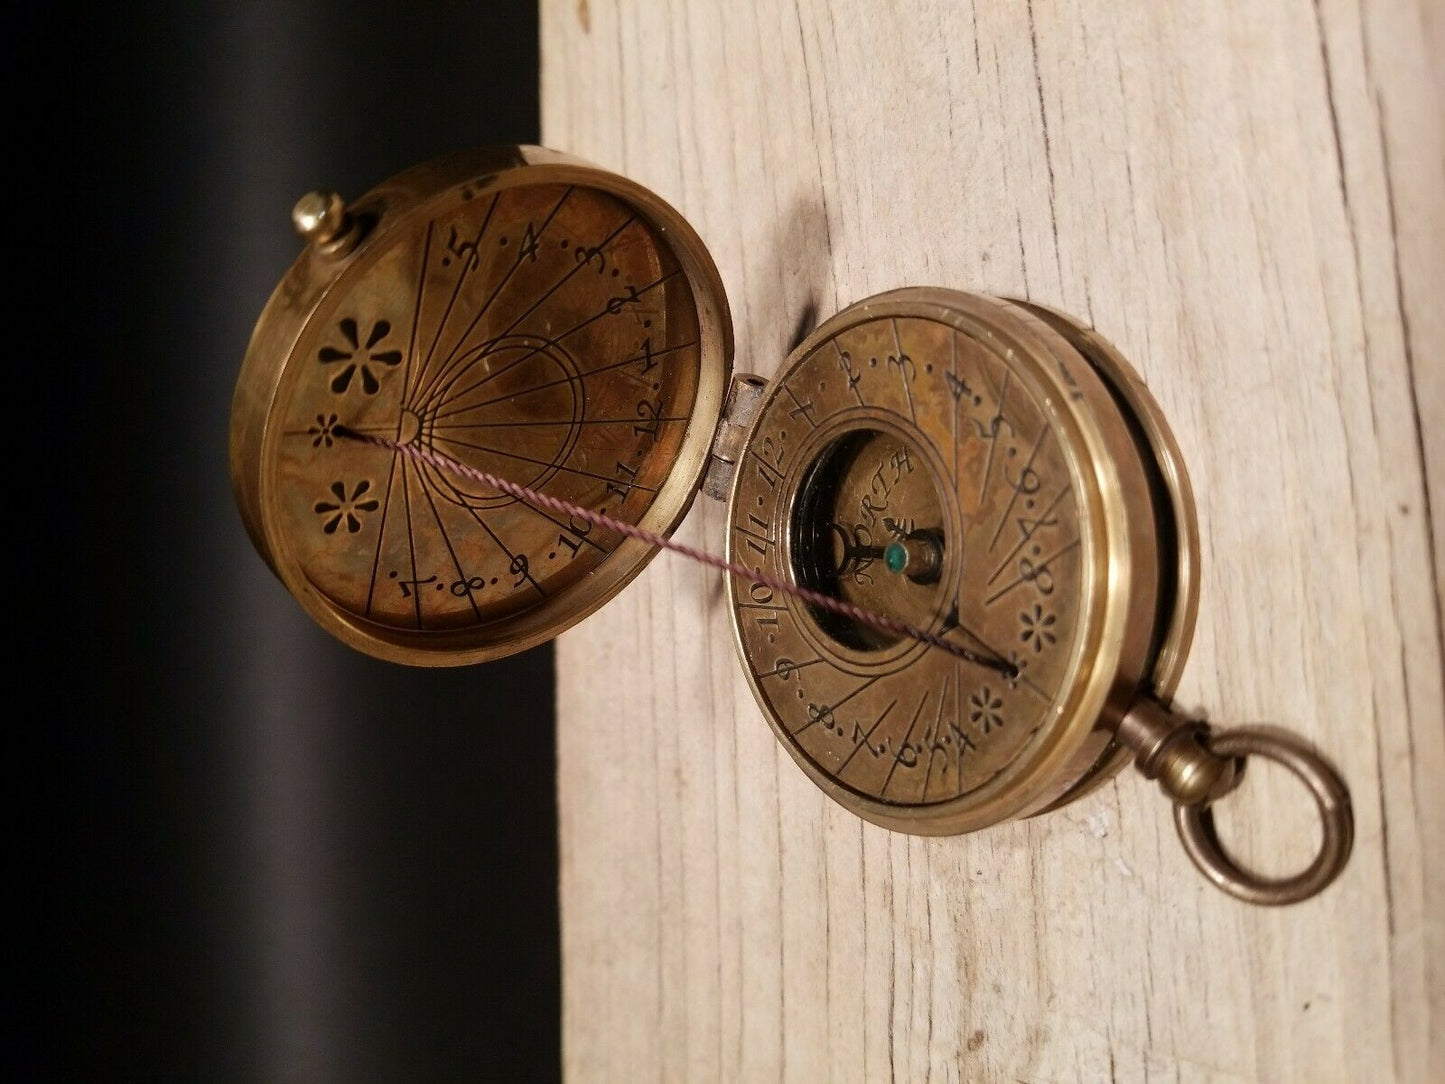 Vintage Antique Style Sundial Compass - Early Home Decor